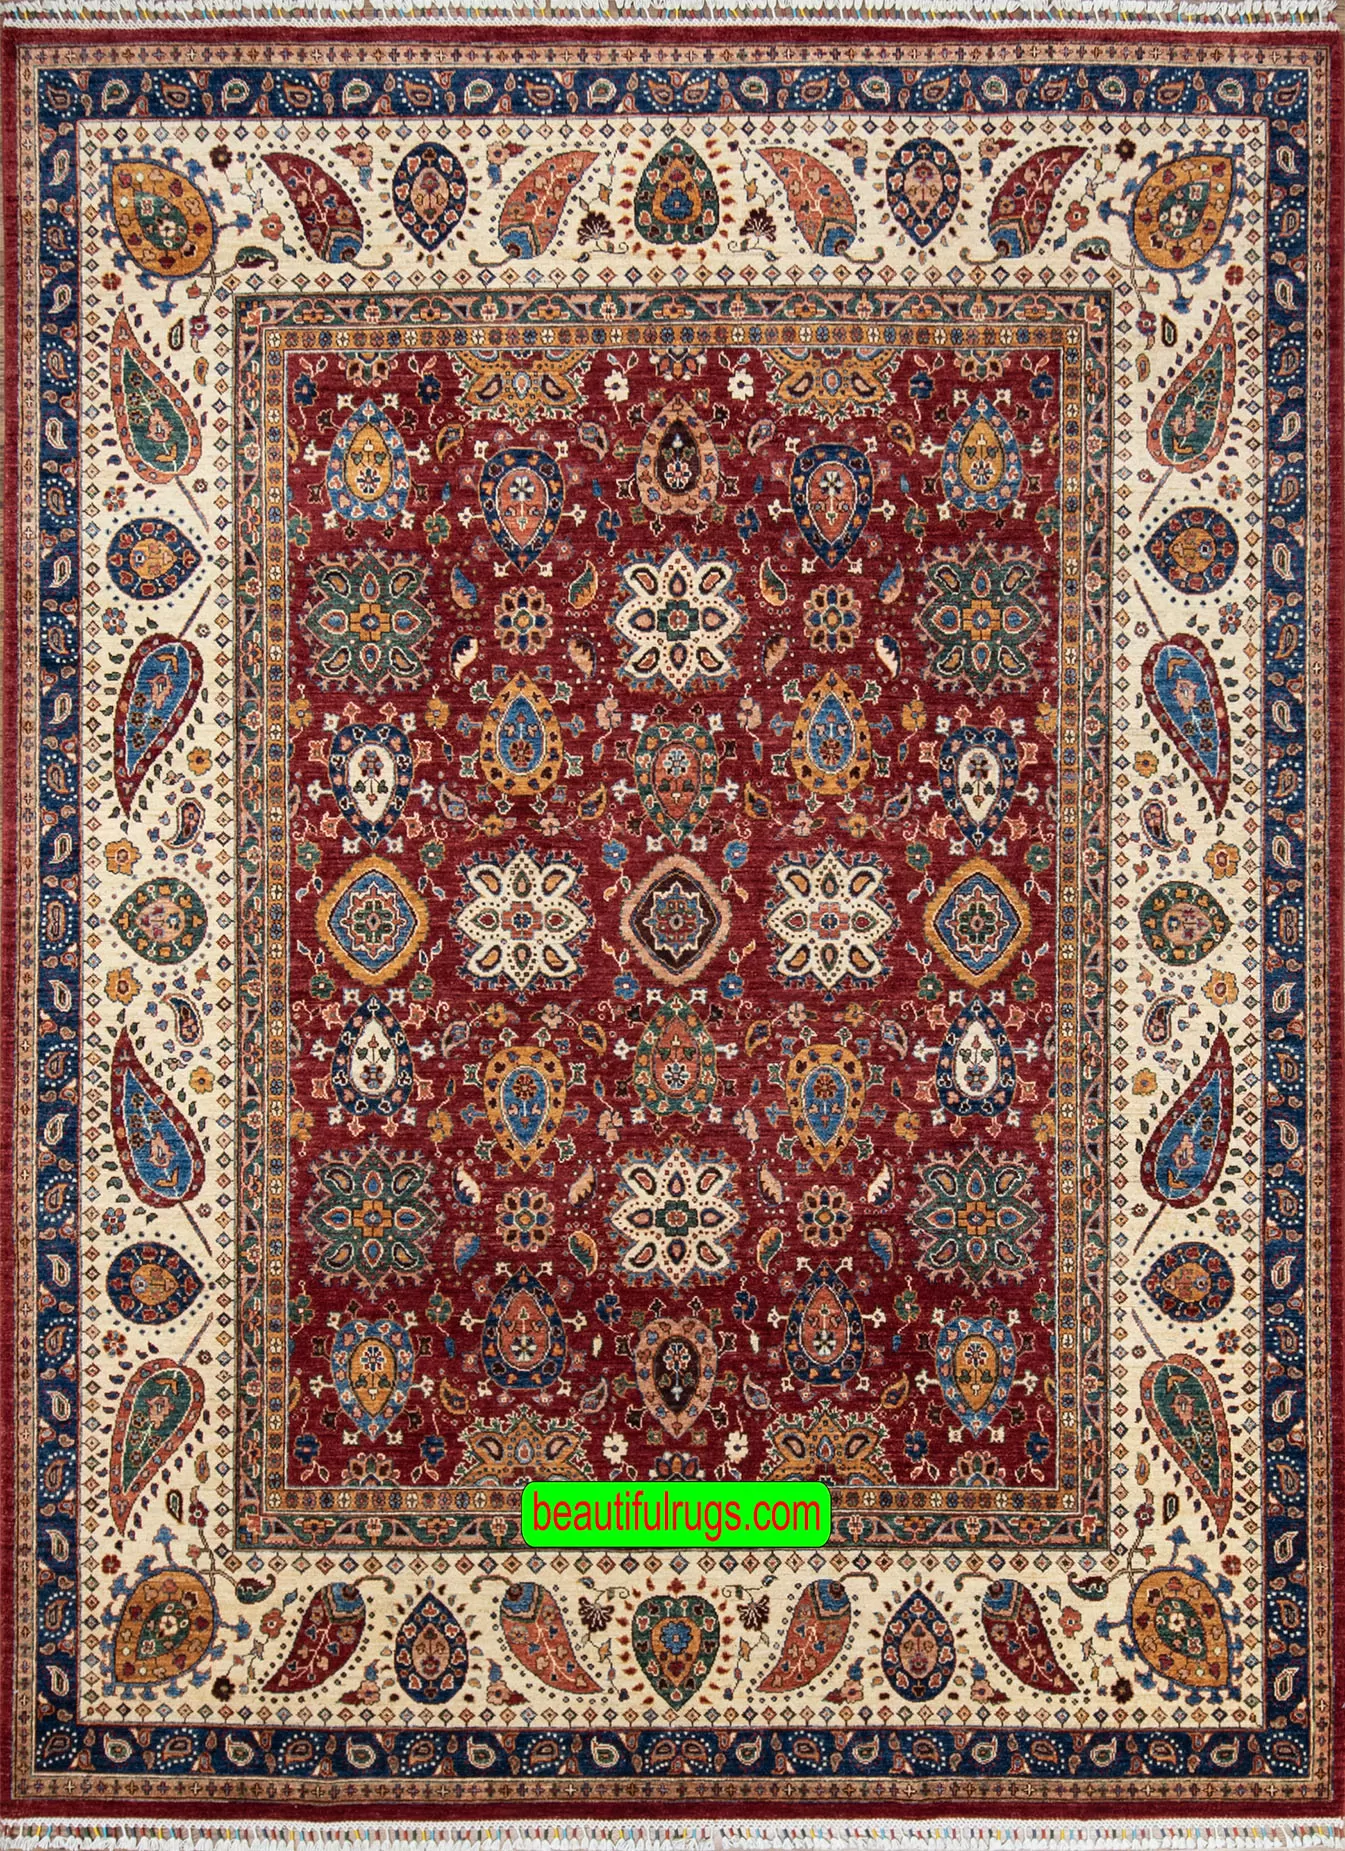 Handmade wool rug with floral and geometric motifs with red color in the center and beige border. Size 8.3x10.4.